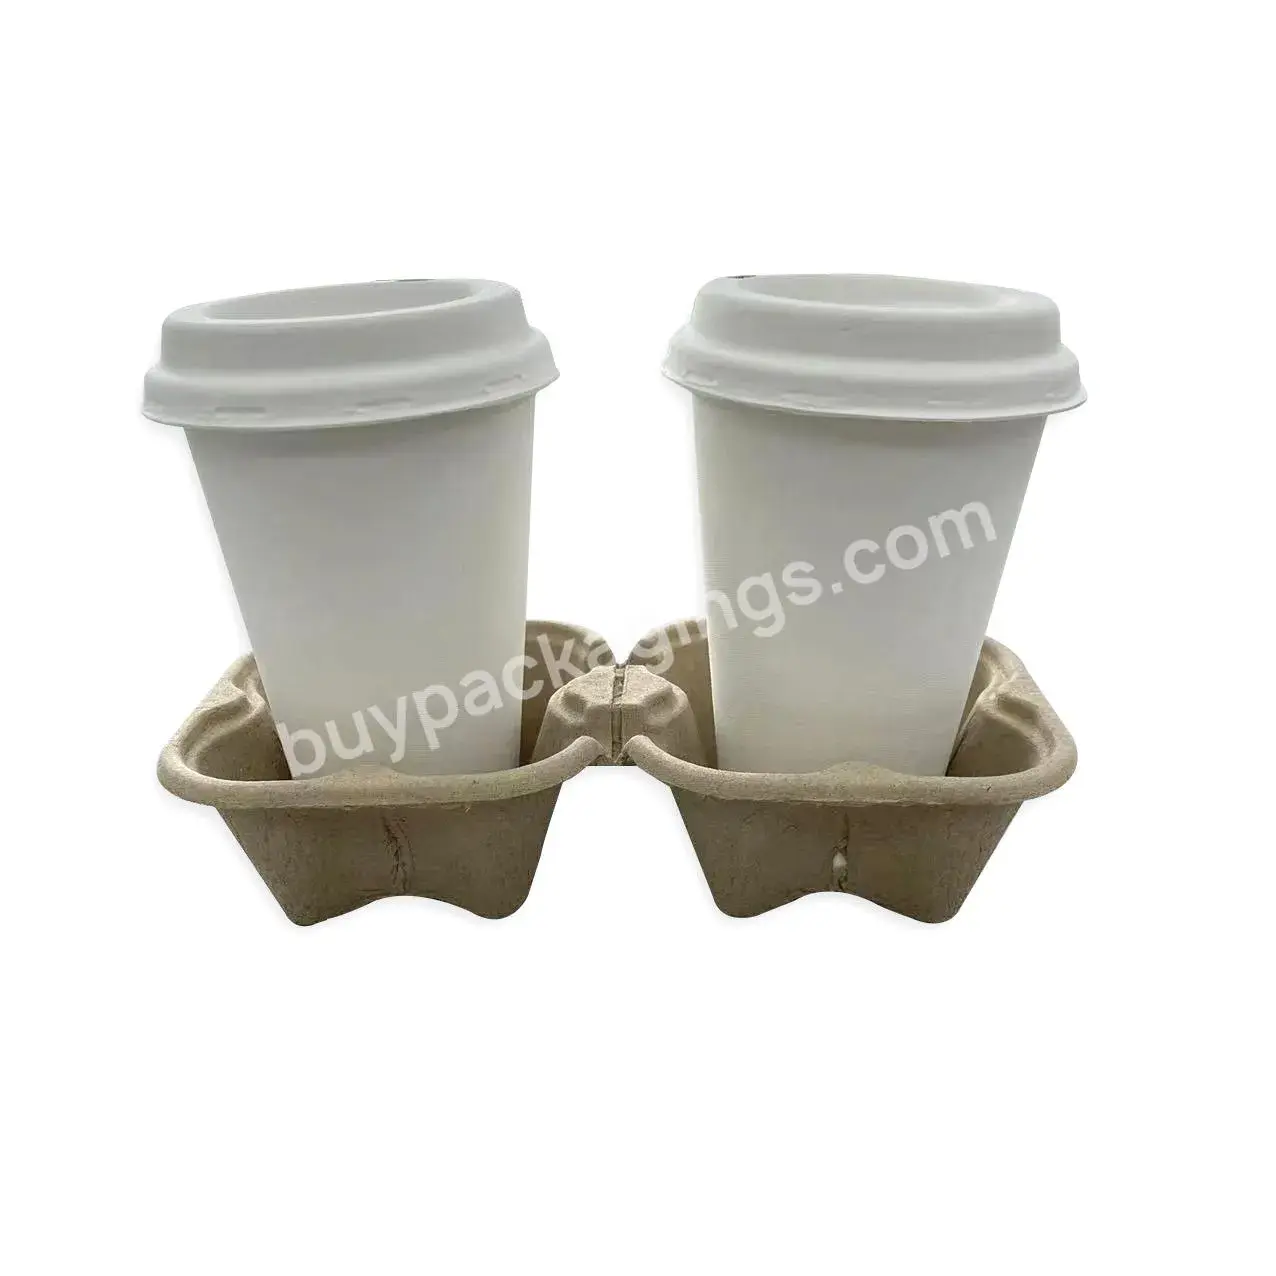 Takeout Restaurant Supplies Pulp Coffee Tray Paper Pulp Sugarcane 2 Cups Holder Pulp Mold Packaging - Buy Pulp Coffee Tray,Paper Pulp Cup Holder,Sugarcane 2 Cups Holder.